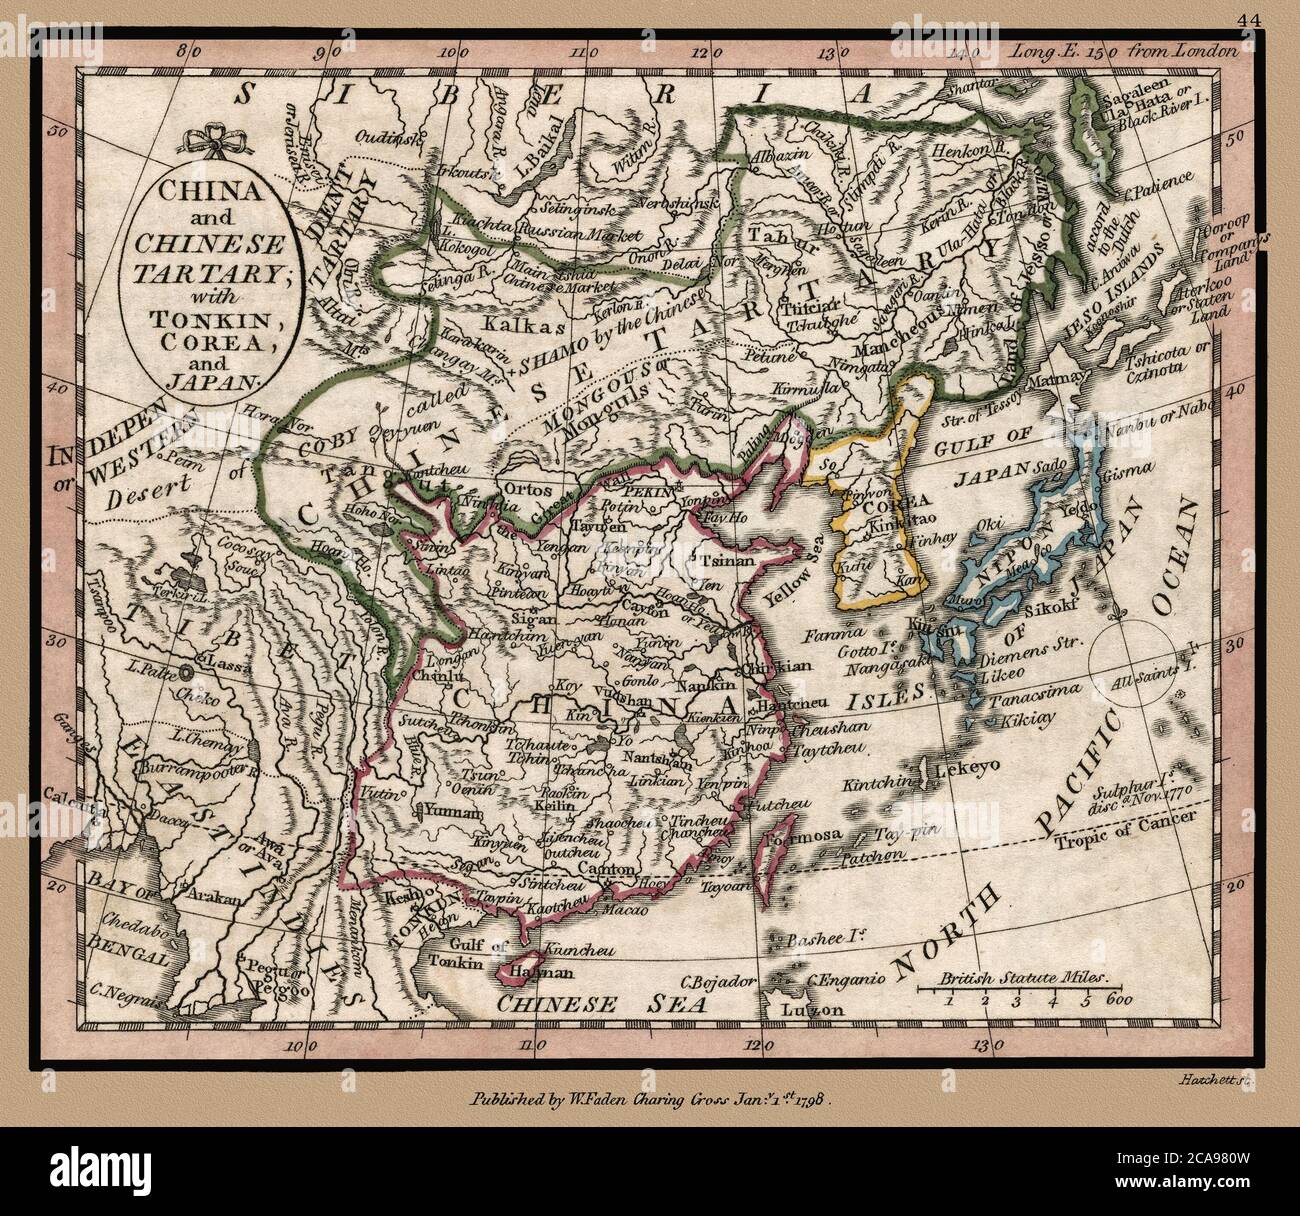 'China and Chinese Tartary, with Tonkin, Corea, and Japan.' Map shows political borders and important landmarks. This is a beautifully detailed historic map reproduction. Original from a British atlas published by famed cartographer William Faden was created circa 1798. Stock Photo